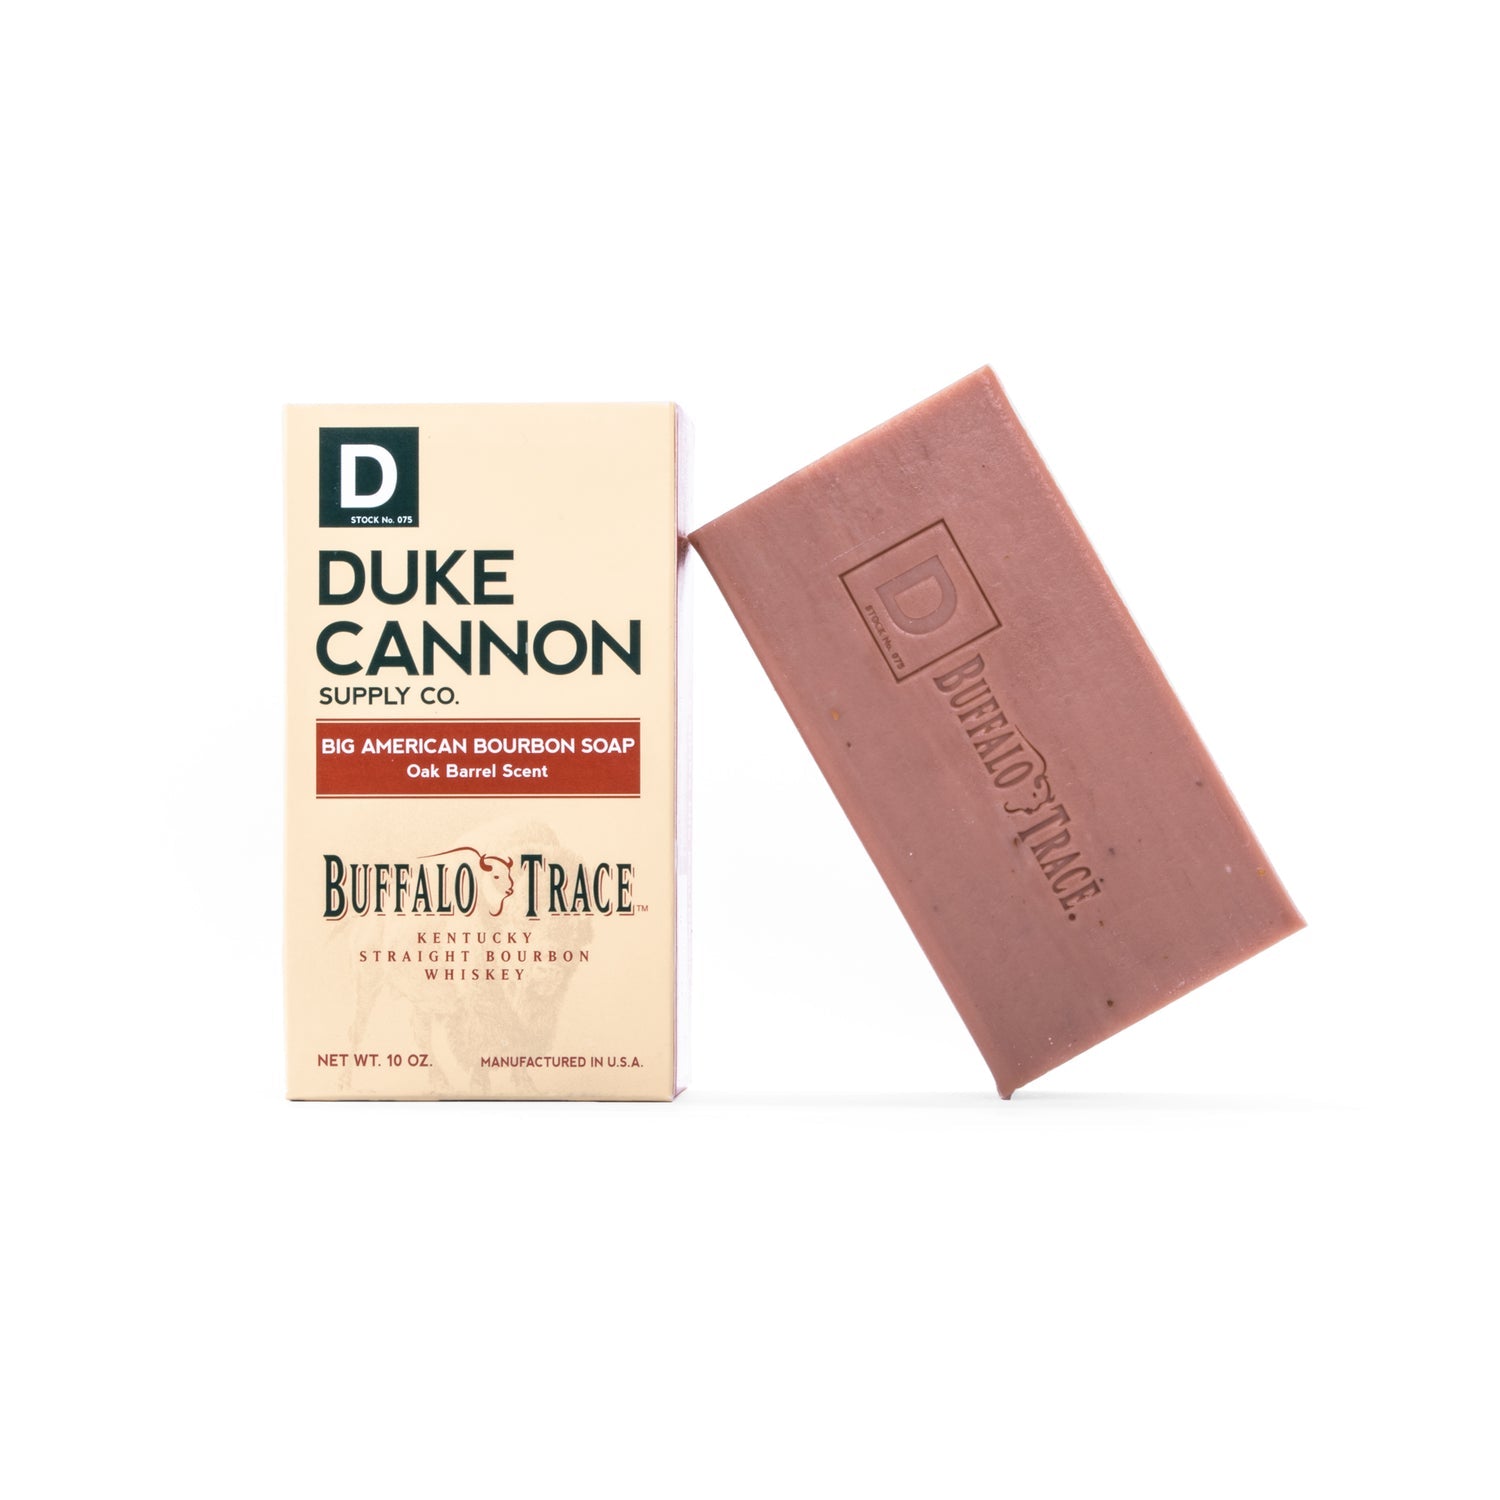 Duke Cannon Big American Bourbon Soap available at The Good Life Boutique